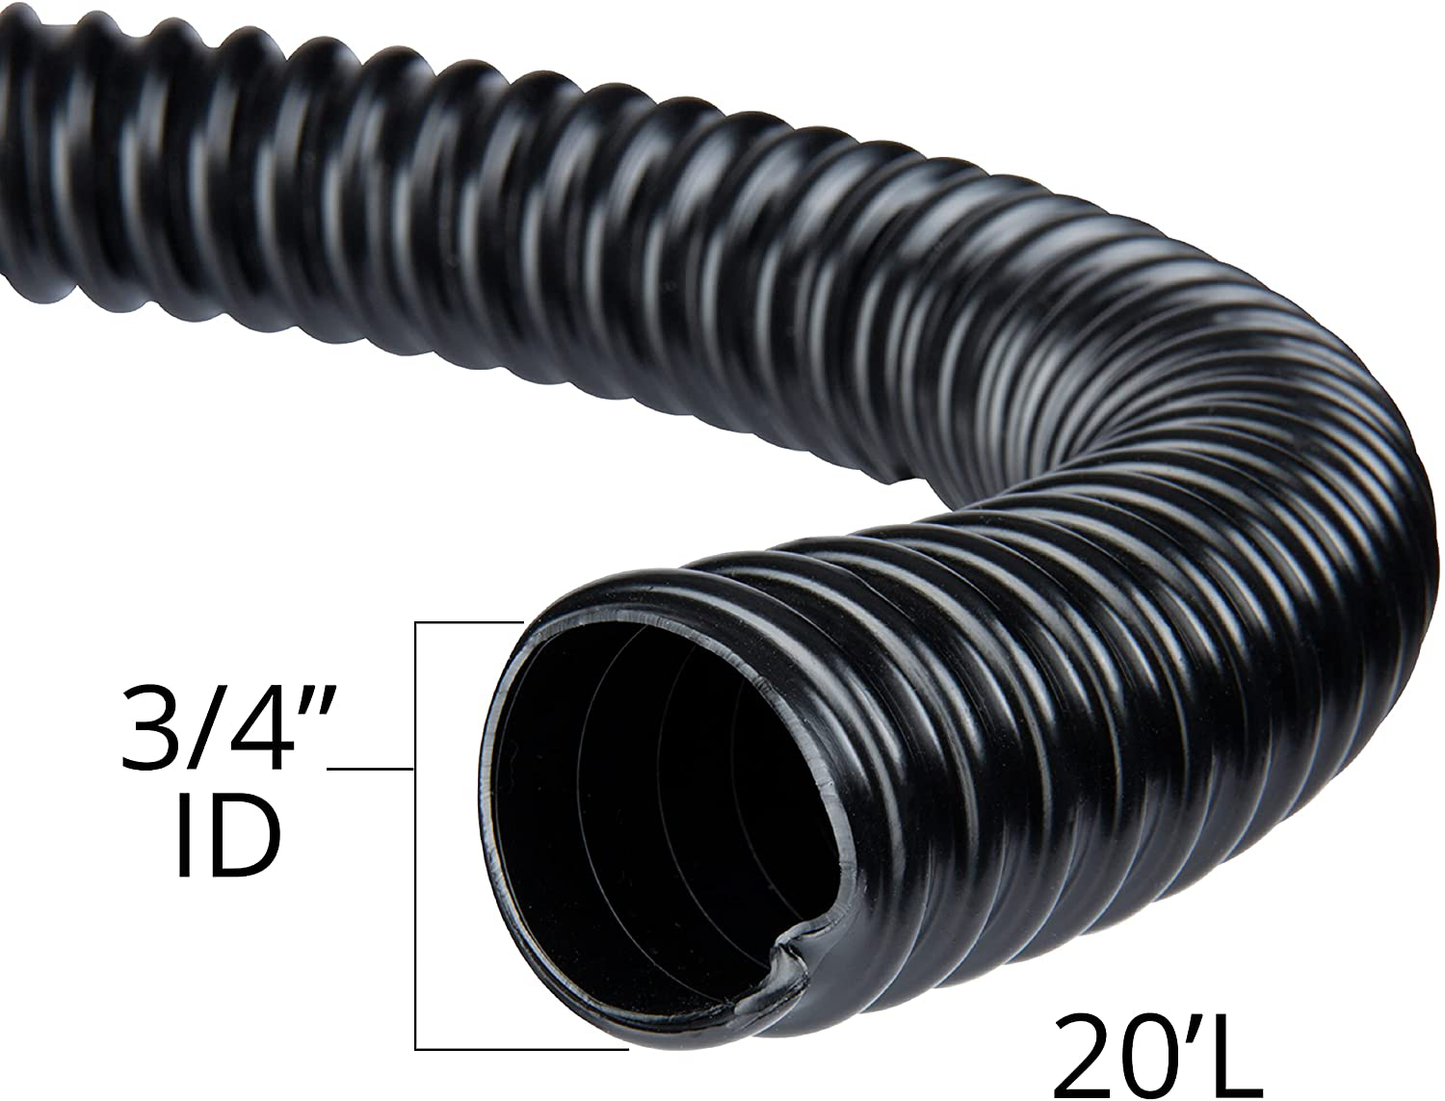 Tetrapond Pond Tubing 3/4 Inch Diameter, 20 Feet Long, Connects Pond Components Animals & Pet Supplies > Pet Supplies > Fish Supplies > Aquarium & Pond Tubing Tetra Pond   